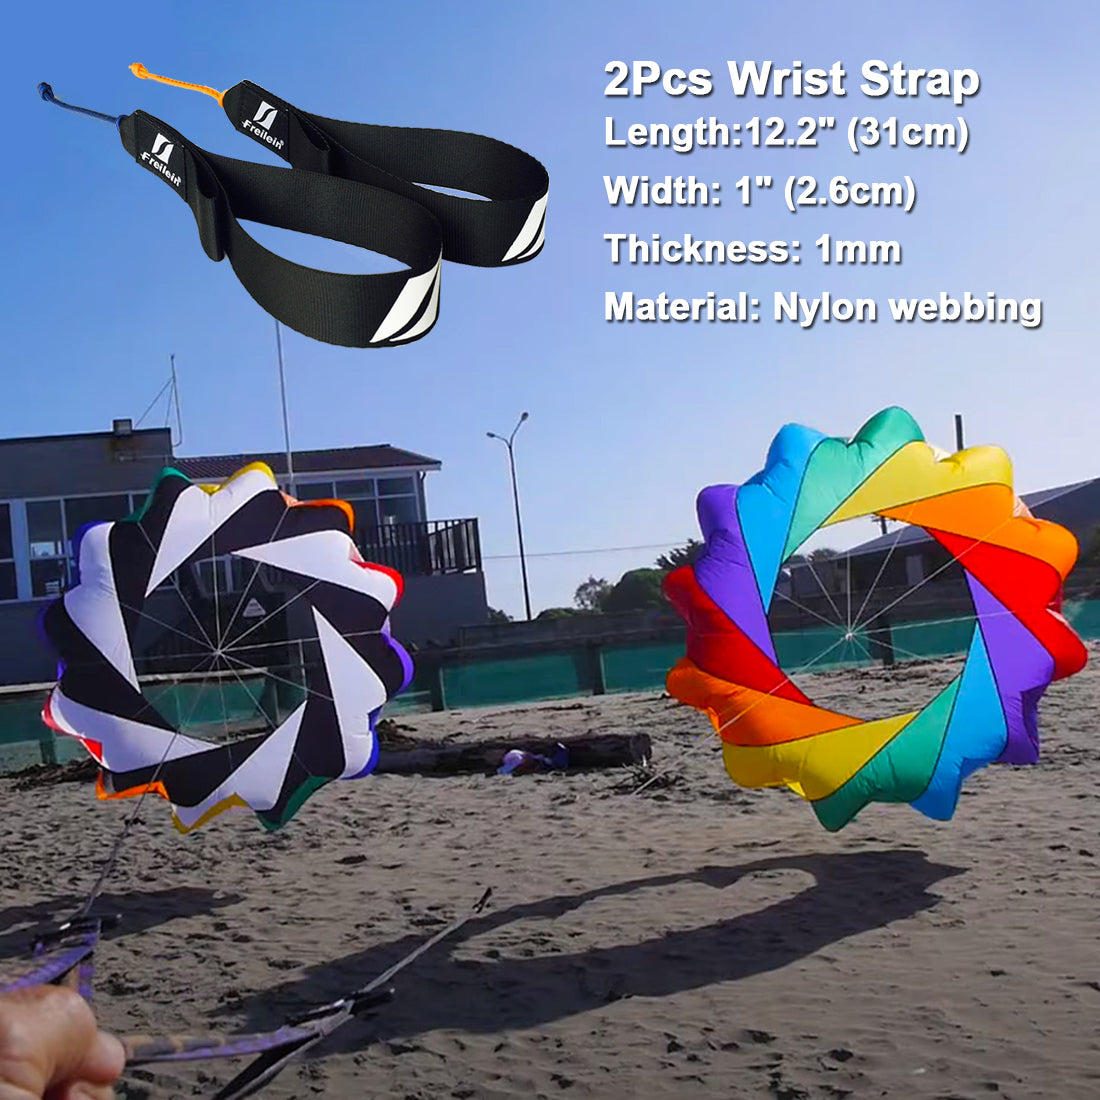 9KM 2m Spinning Windsock Ring Kite Line Laundry 30D Ripstop Nylon with Bag